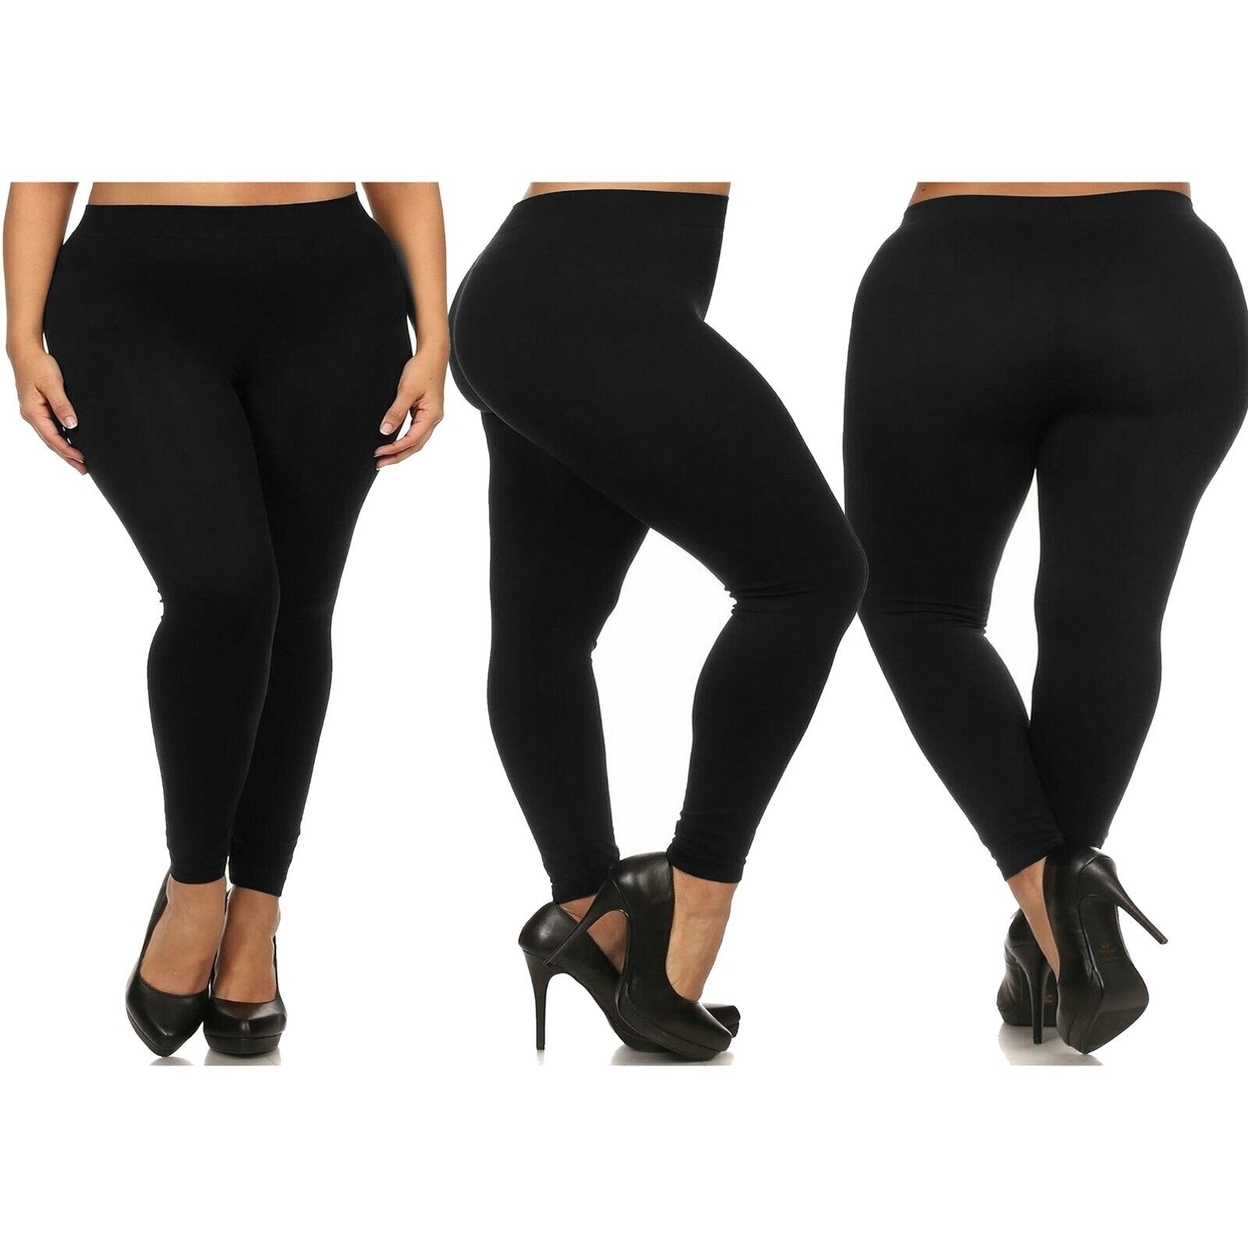 2-Pack: Women's Casual Ultra-Soft Smooth High Waisted Athletic Active Yoga Leggings Plus Size Available - Black & Black, 3x